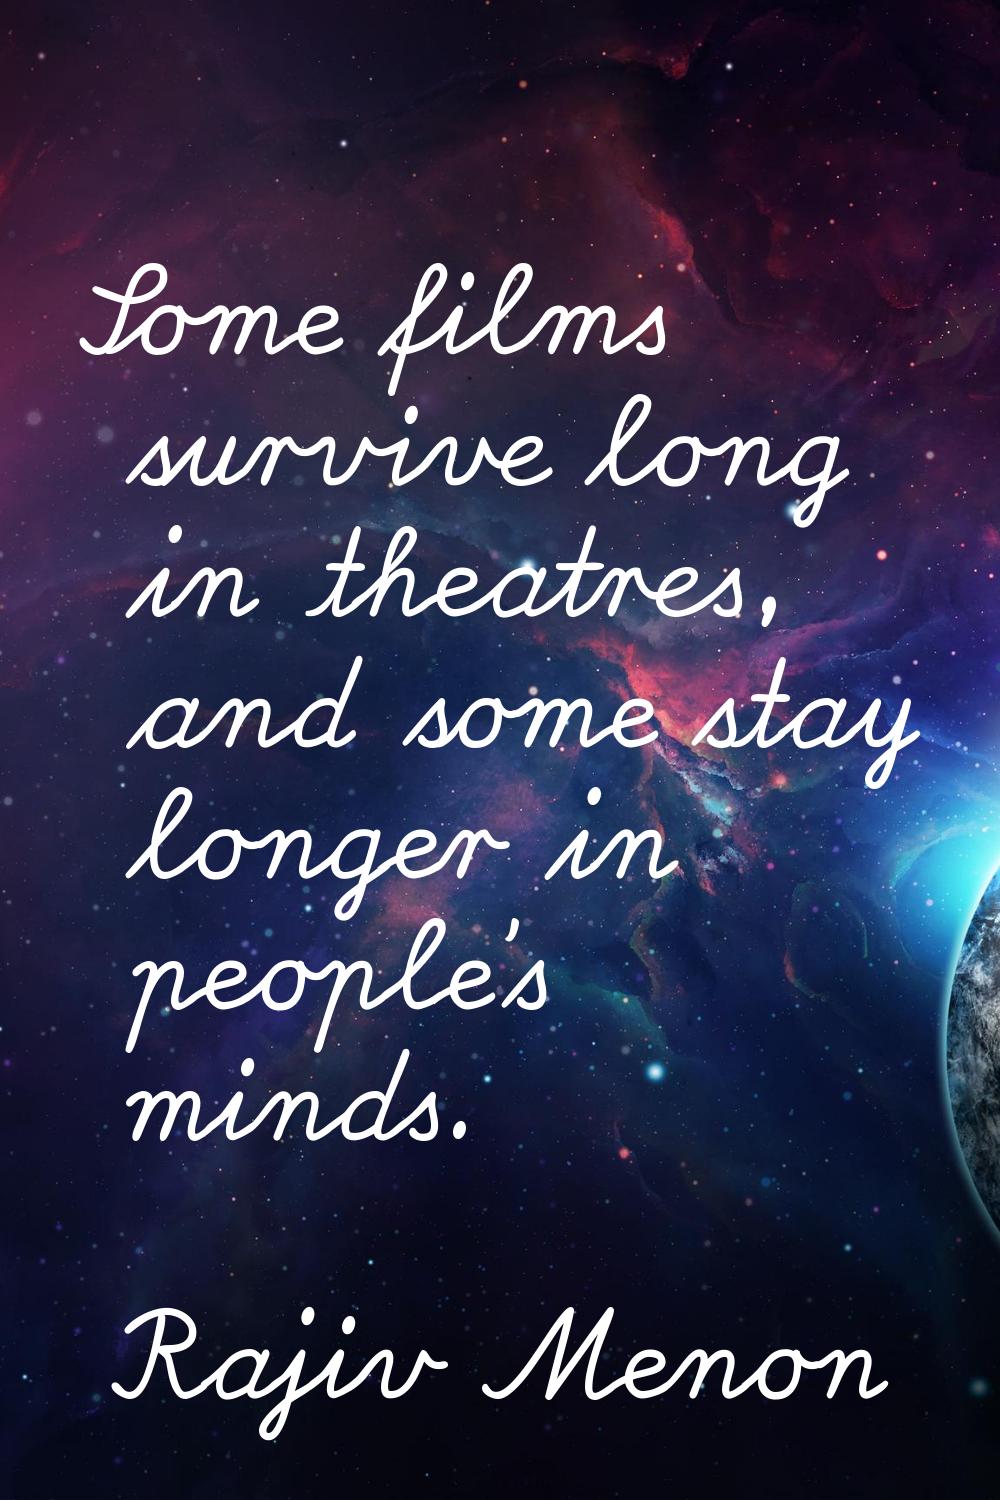 Some films survive long in theatres, and some stay longer in people's minds.